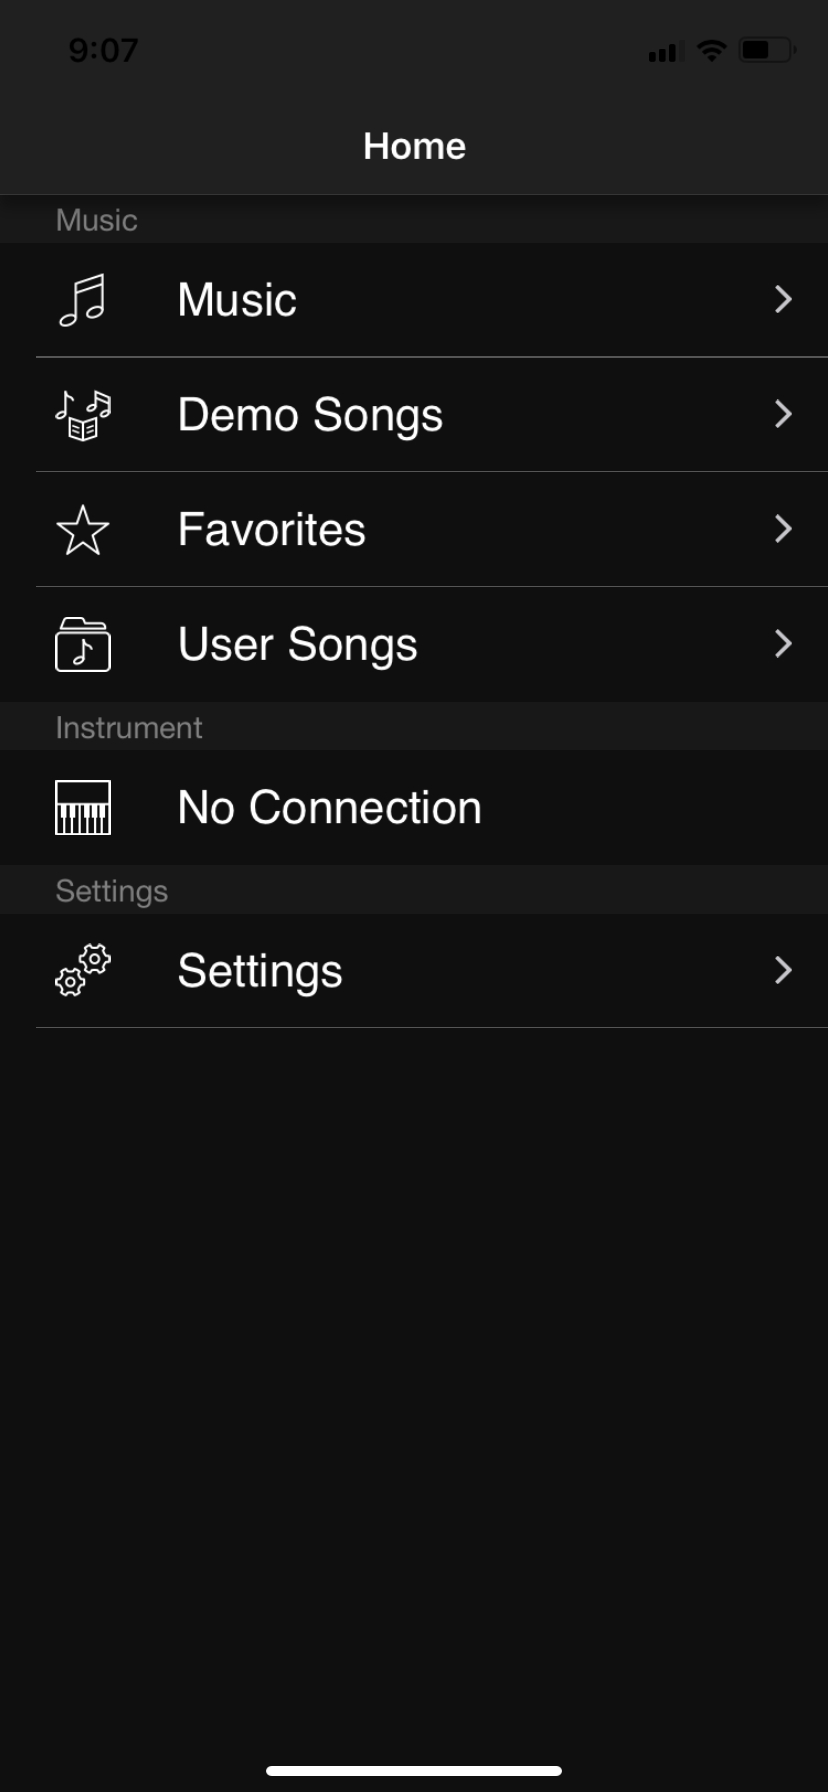 The Chord Tracker home screen. It contains different options to access a user library of music.